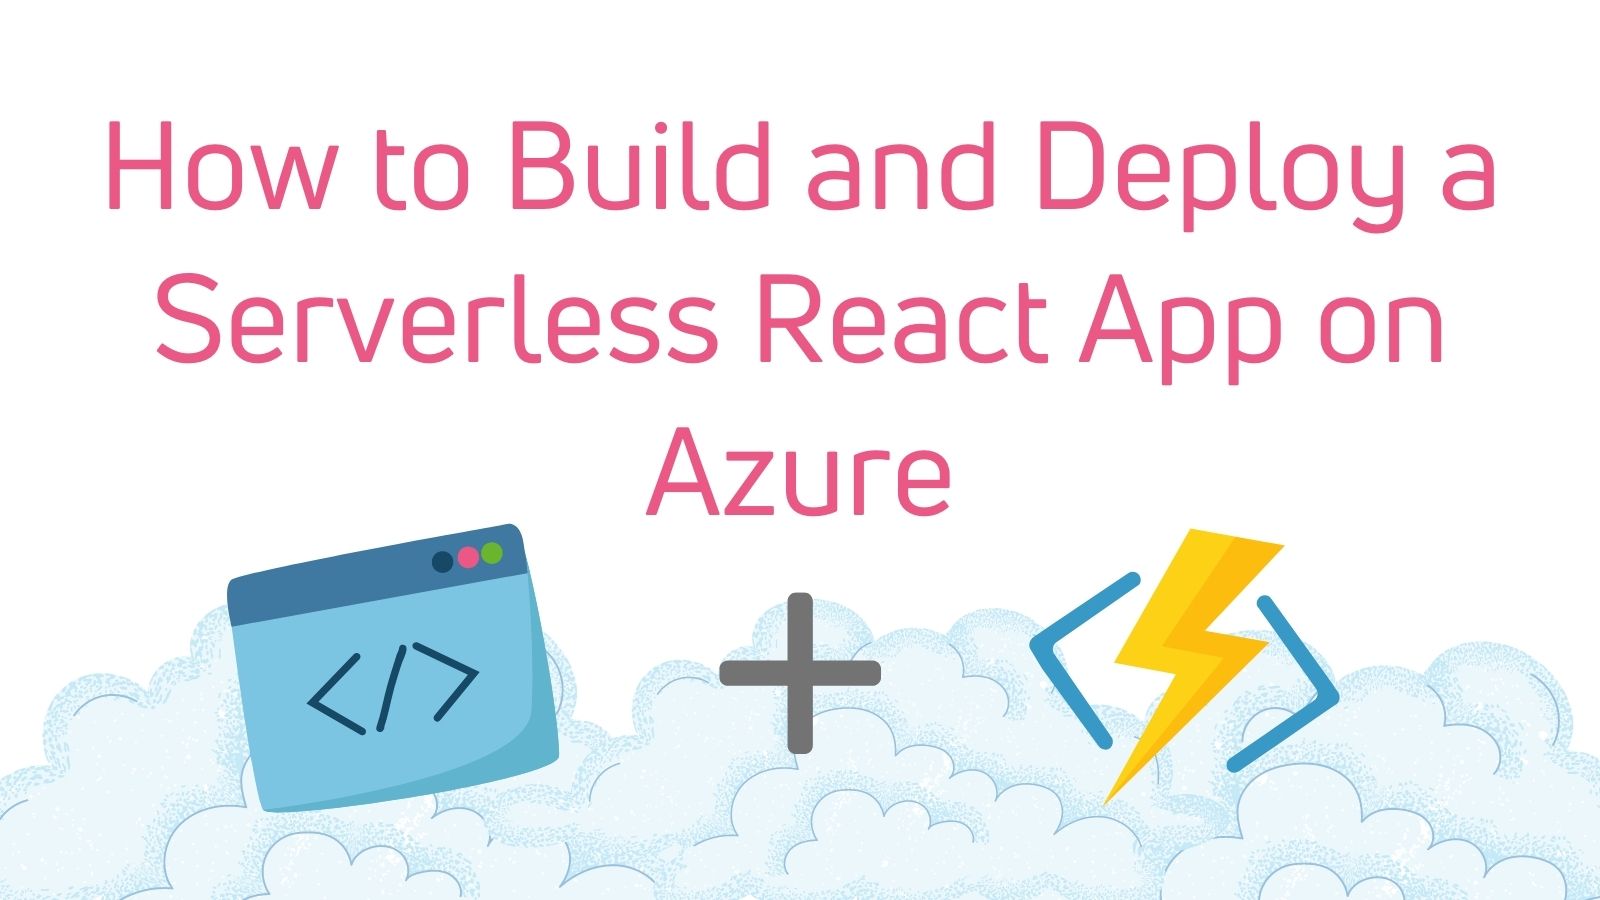 How to Build and Deploy a Serverless React App on Azure